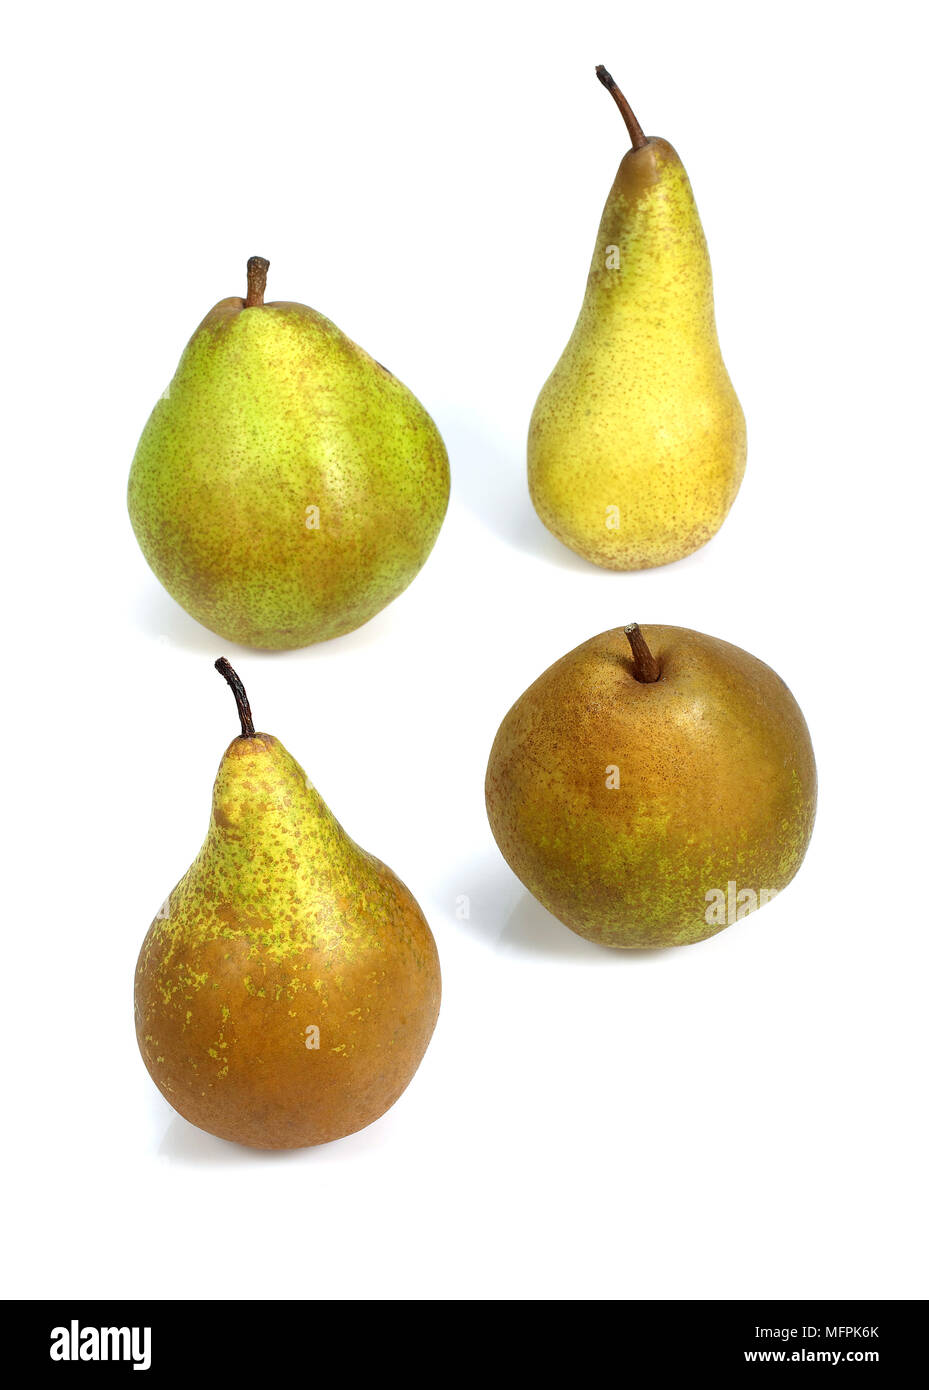 Comice Pear, Williams Pear, Beurre Hardy Pear, Conference Pear, pyrus communis, Fruits against White Background Stock Photo